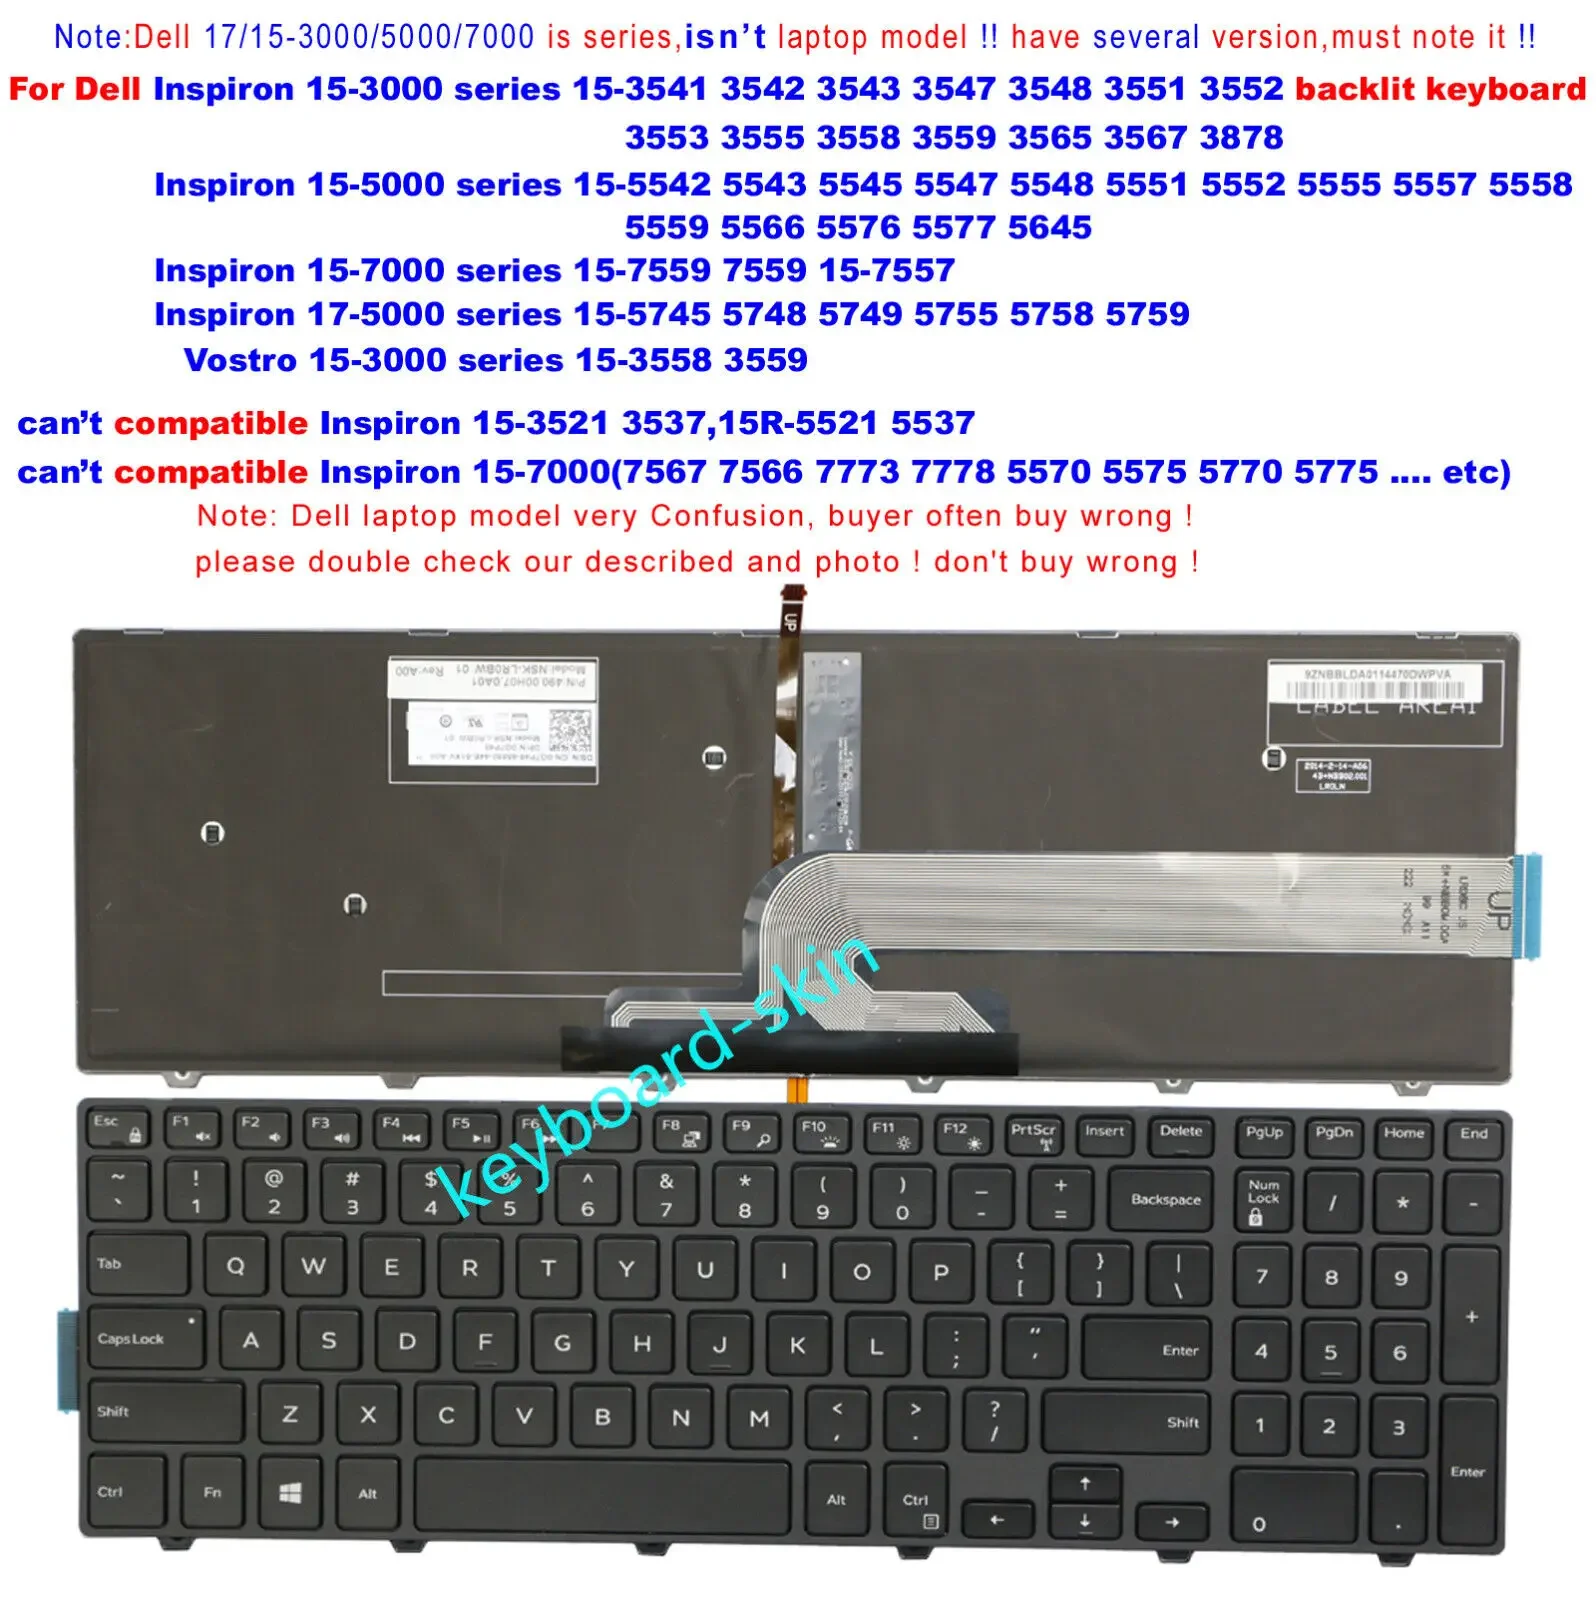 

New US Backlit Keyboard for Dell 15-5000 series 5542 5543 5545 5547 5548 5551 5552 5555 5557 5558 5559 5566 5576 5577 5645laptop